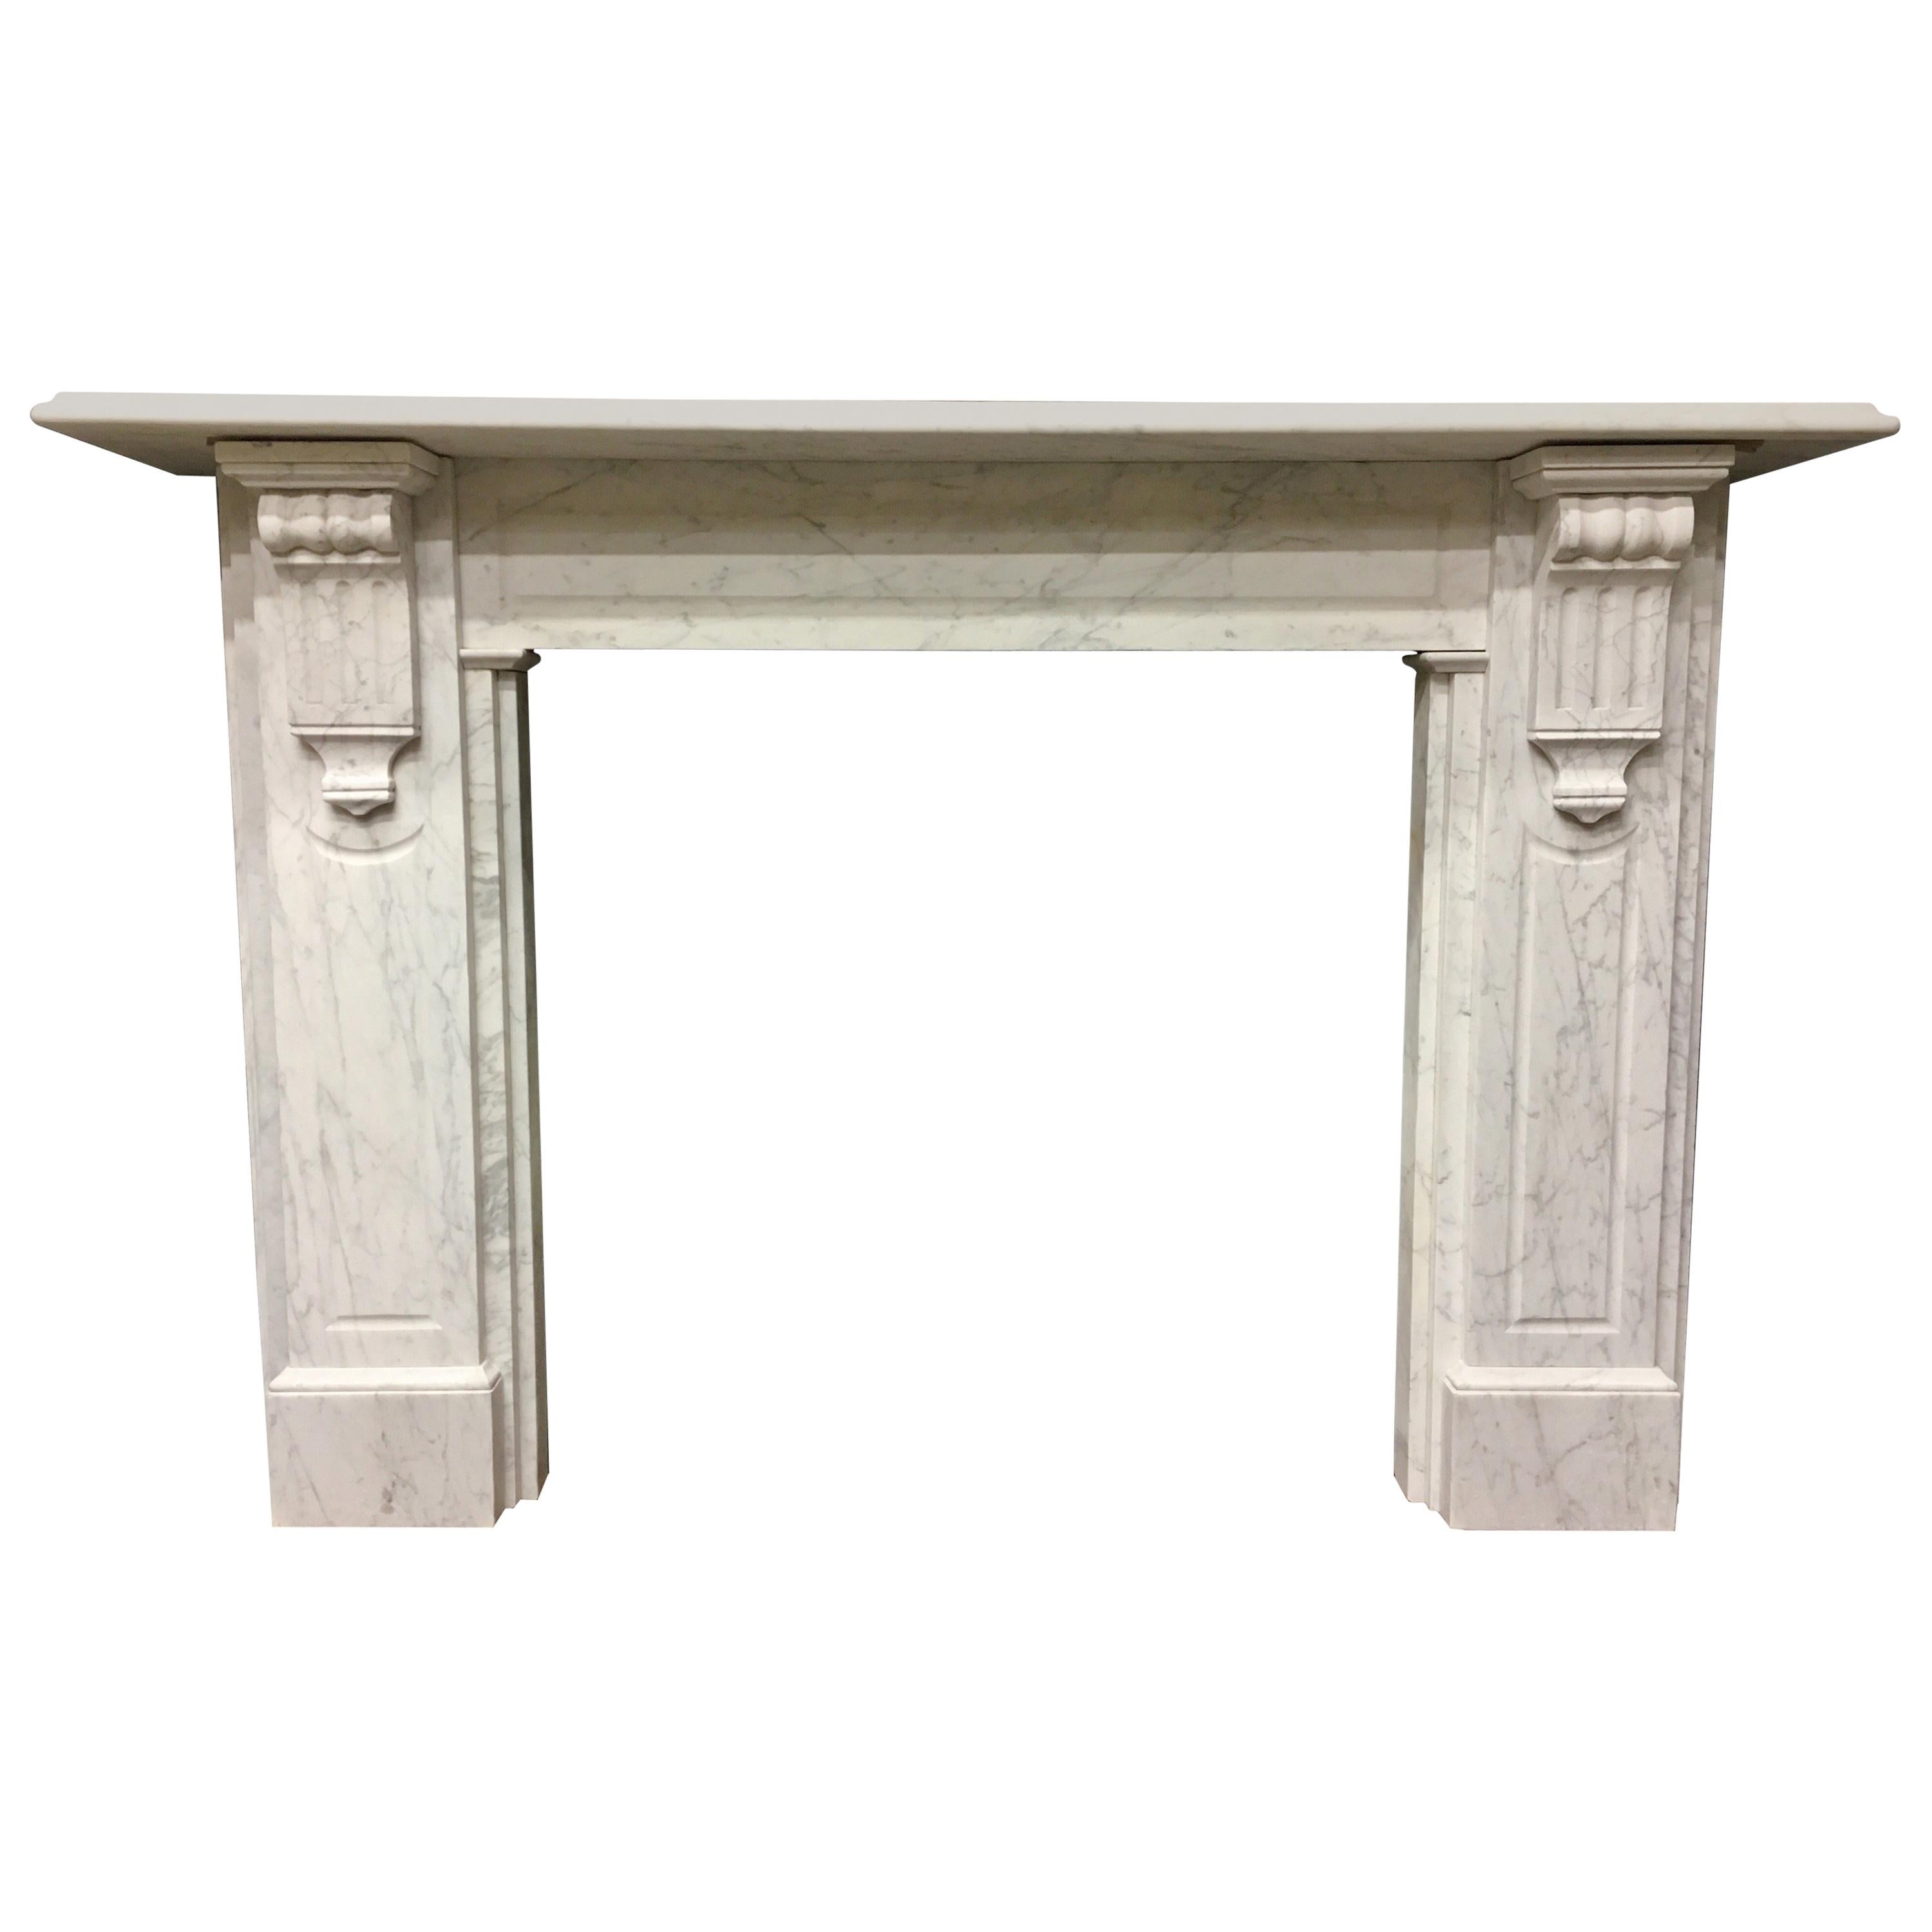 Large Antique 19th Century Mid-Victorian Carrara Marble Fireplace Surround